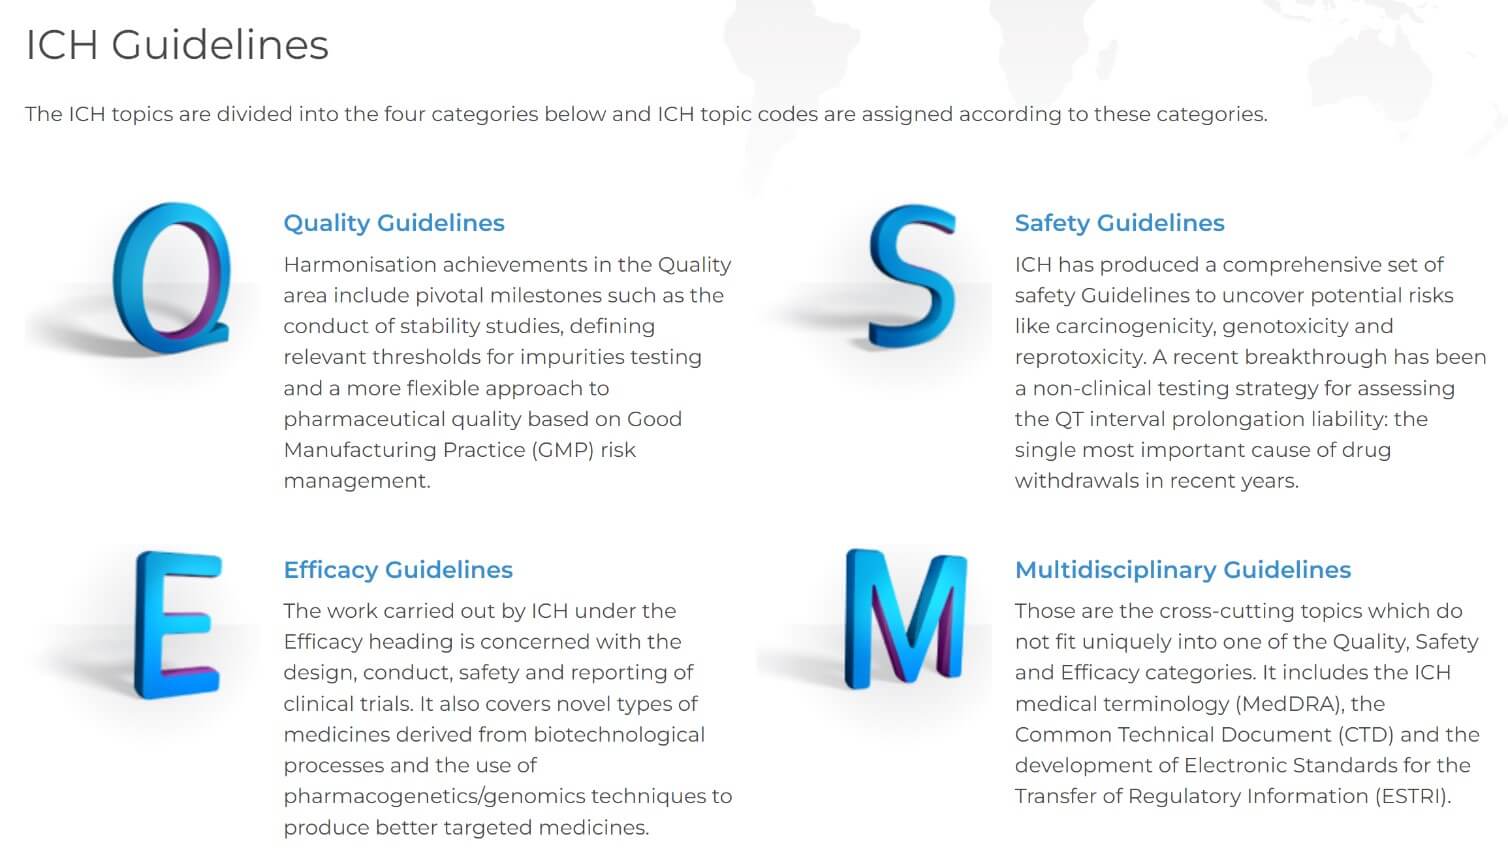 ICH_Guidelines_Quality_Safety_Efficacy_Multidisciplinary